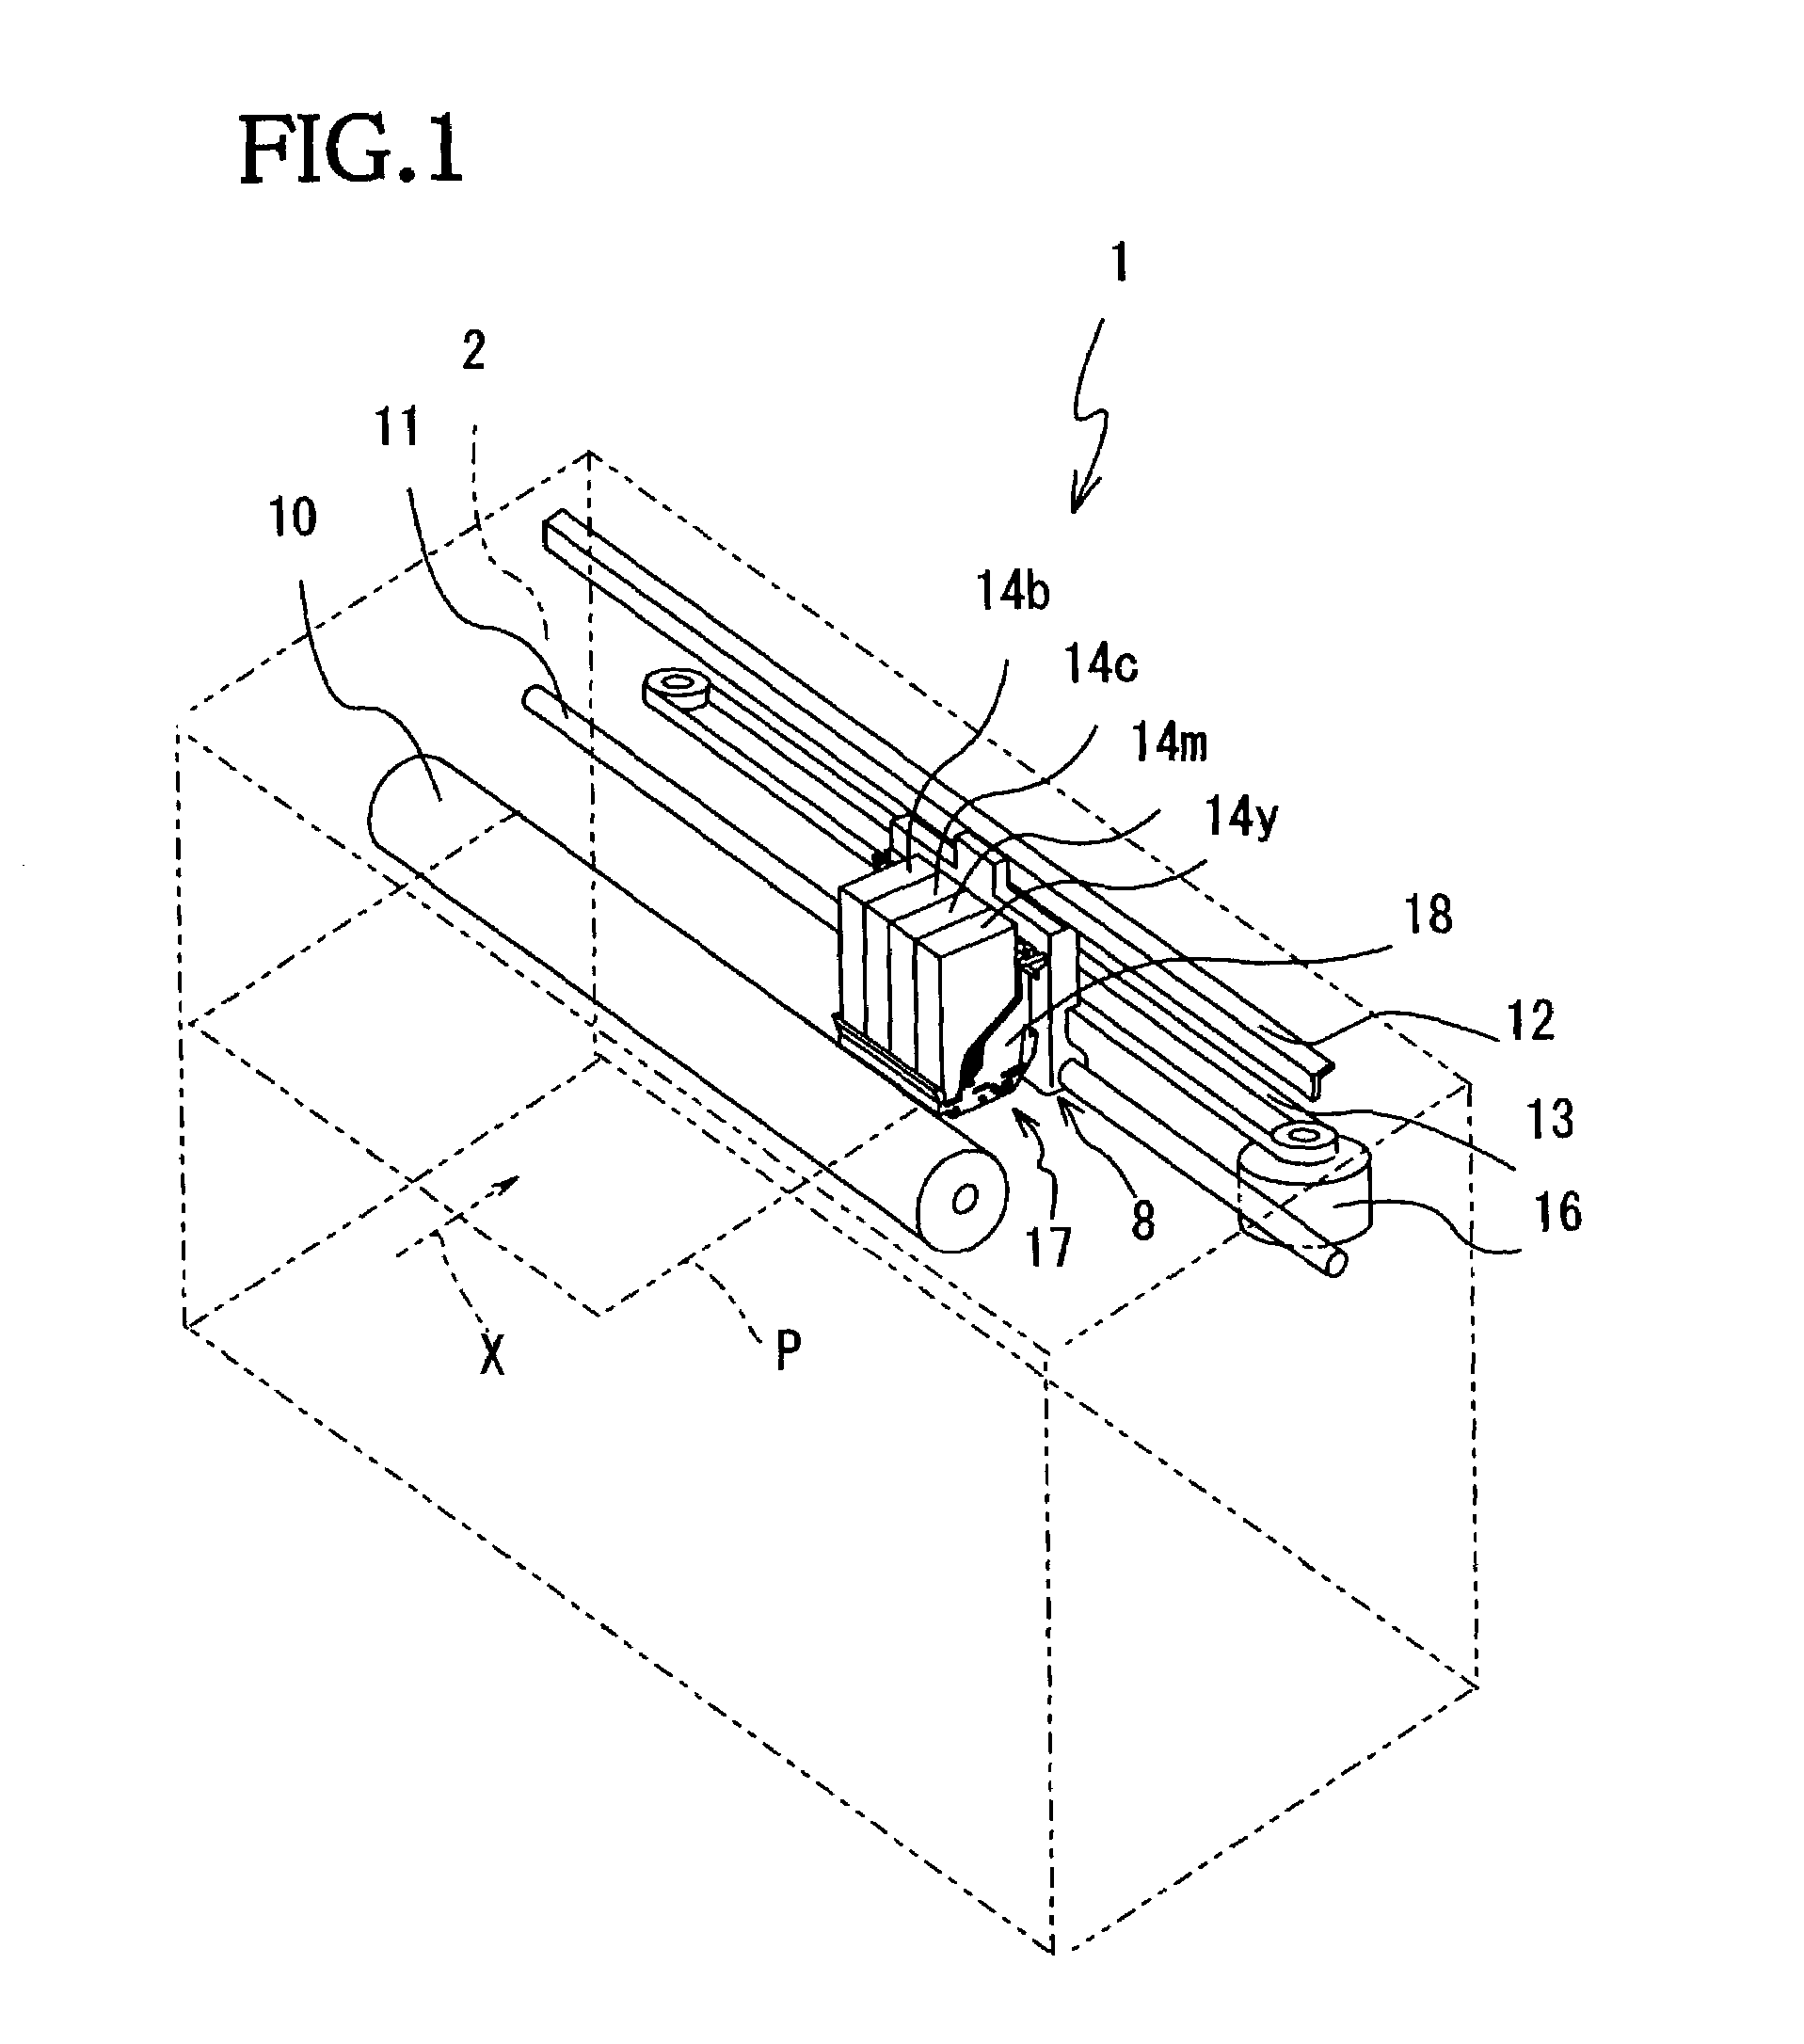 Structure of flexible printed circuit board